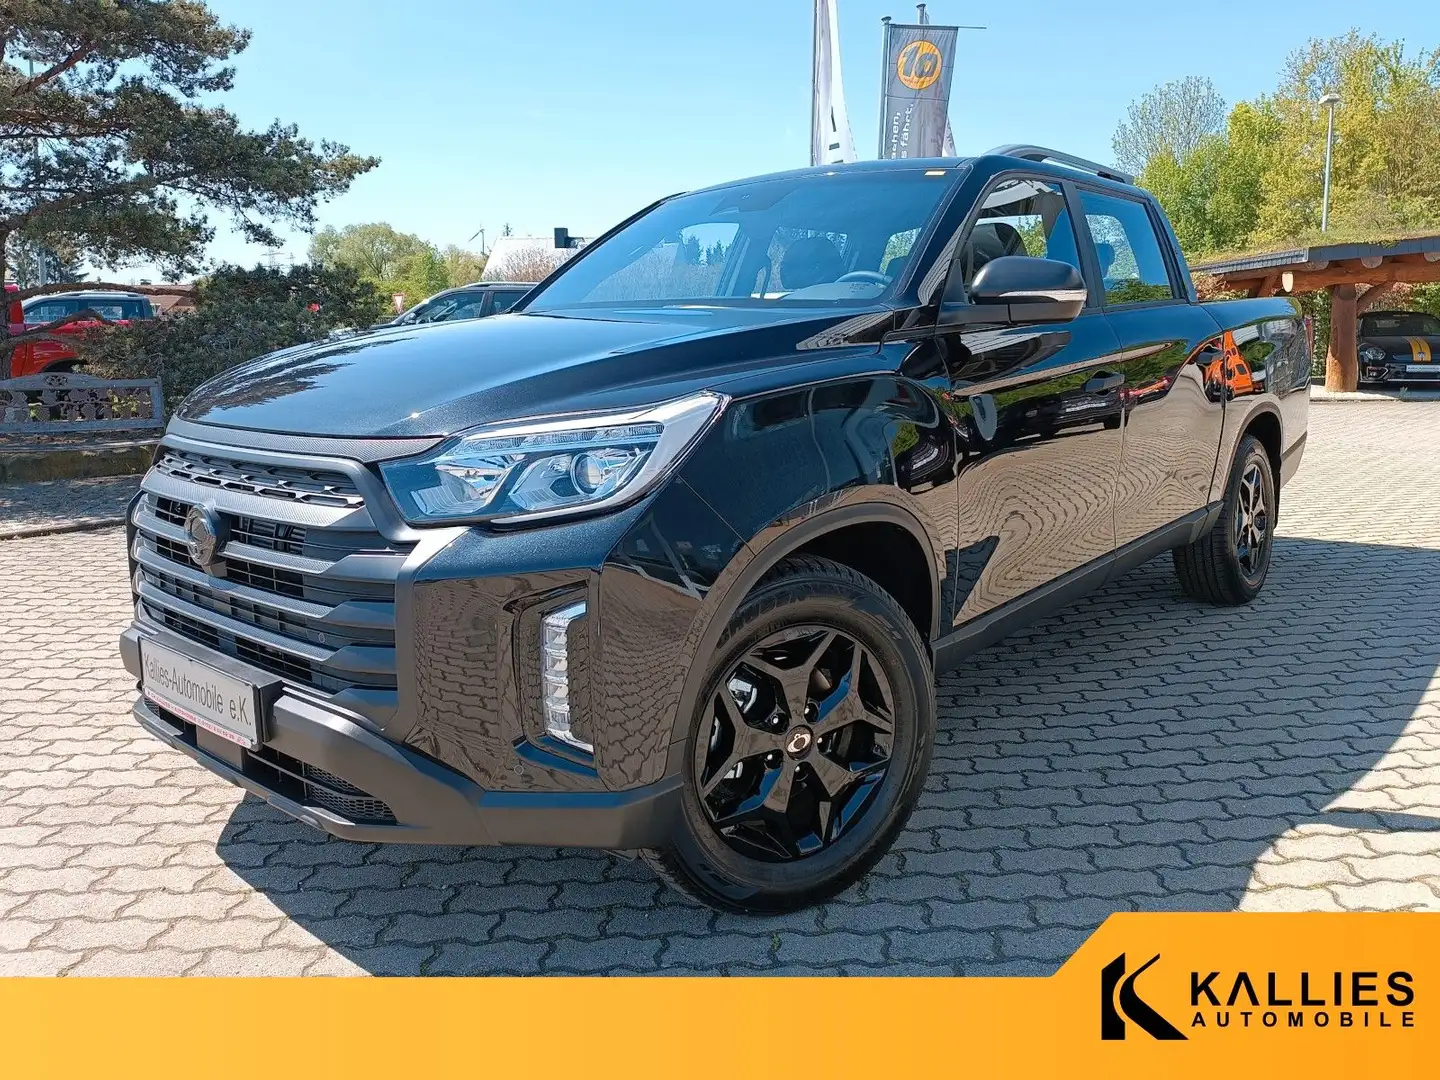 SsangYong Musso Musso Grand 2.2d 202PS AT 4x4 LEDER+XENON+SD+DIF Black - 1